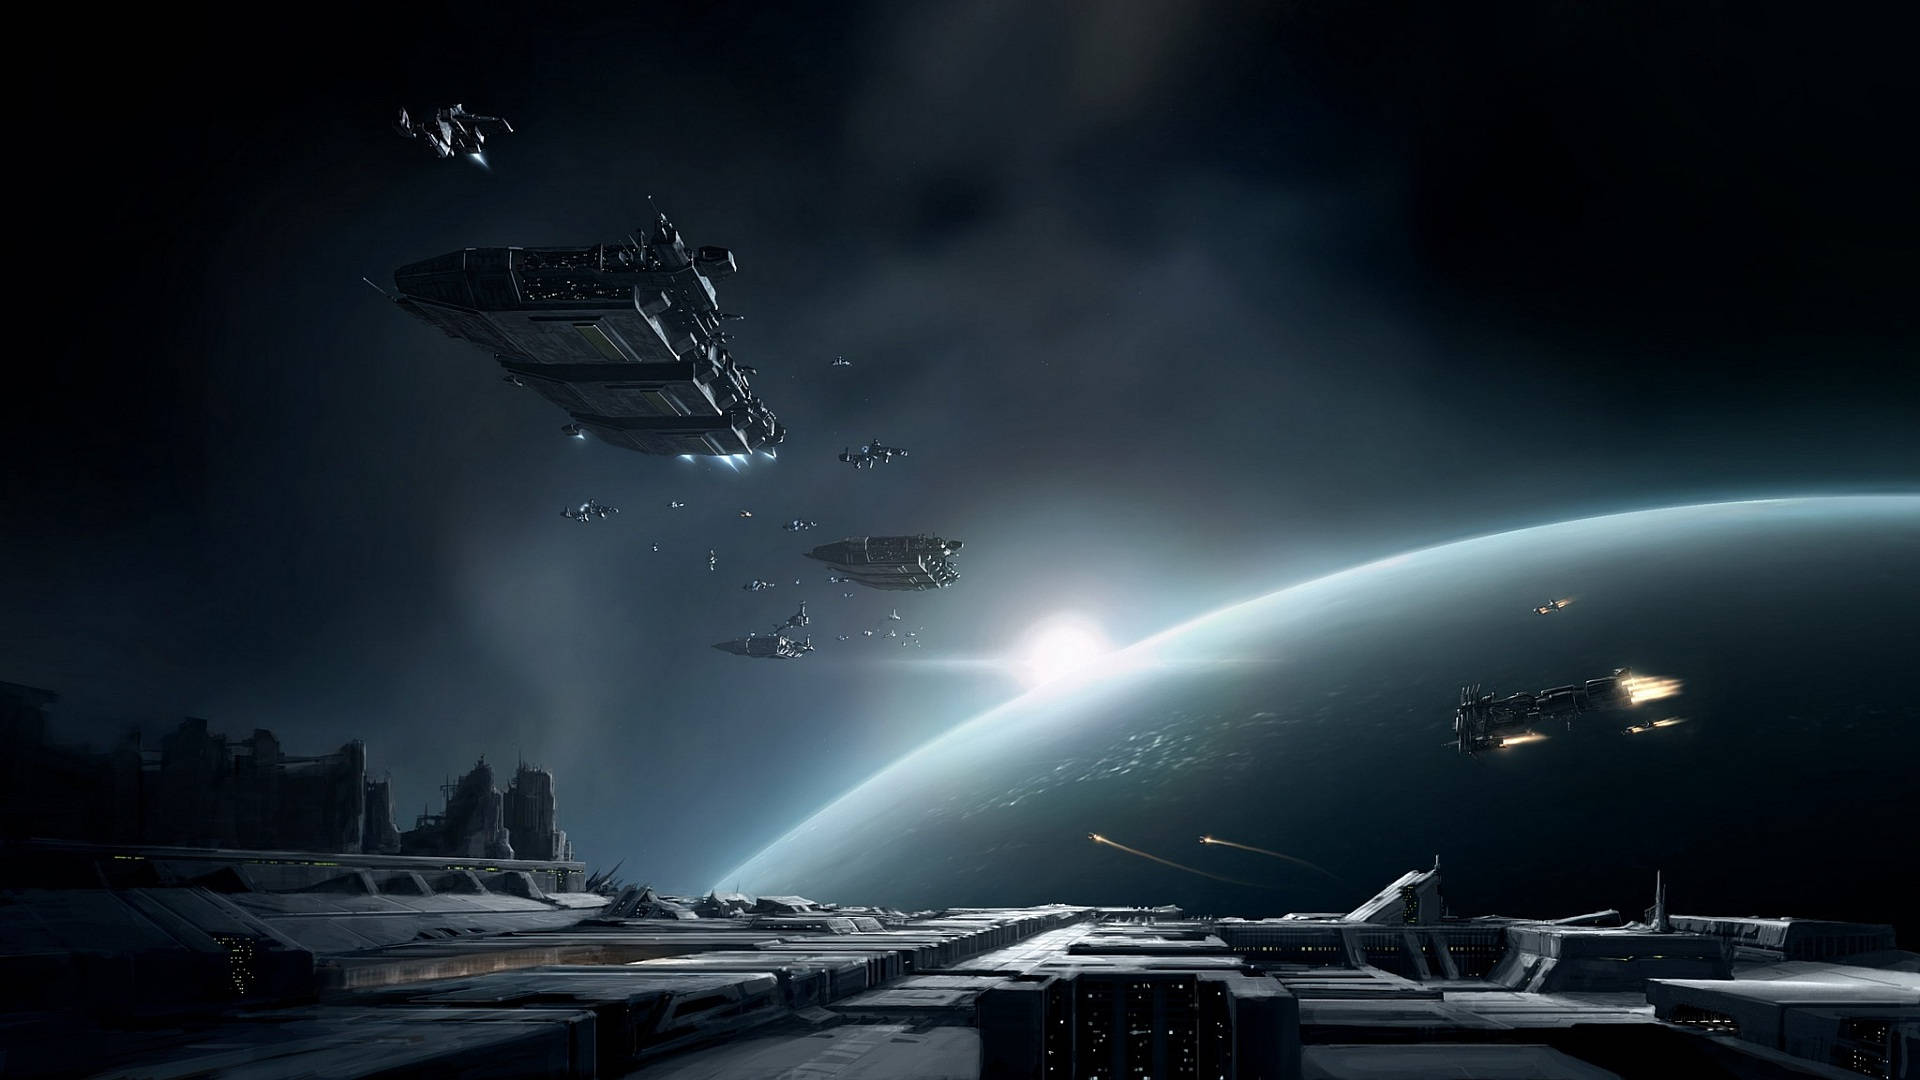 EVE Online Space Travel And Adventure Wallpaper